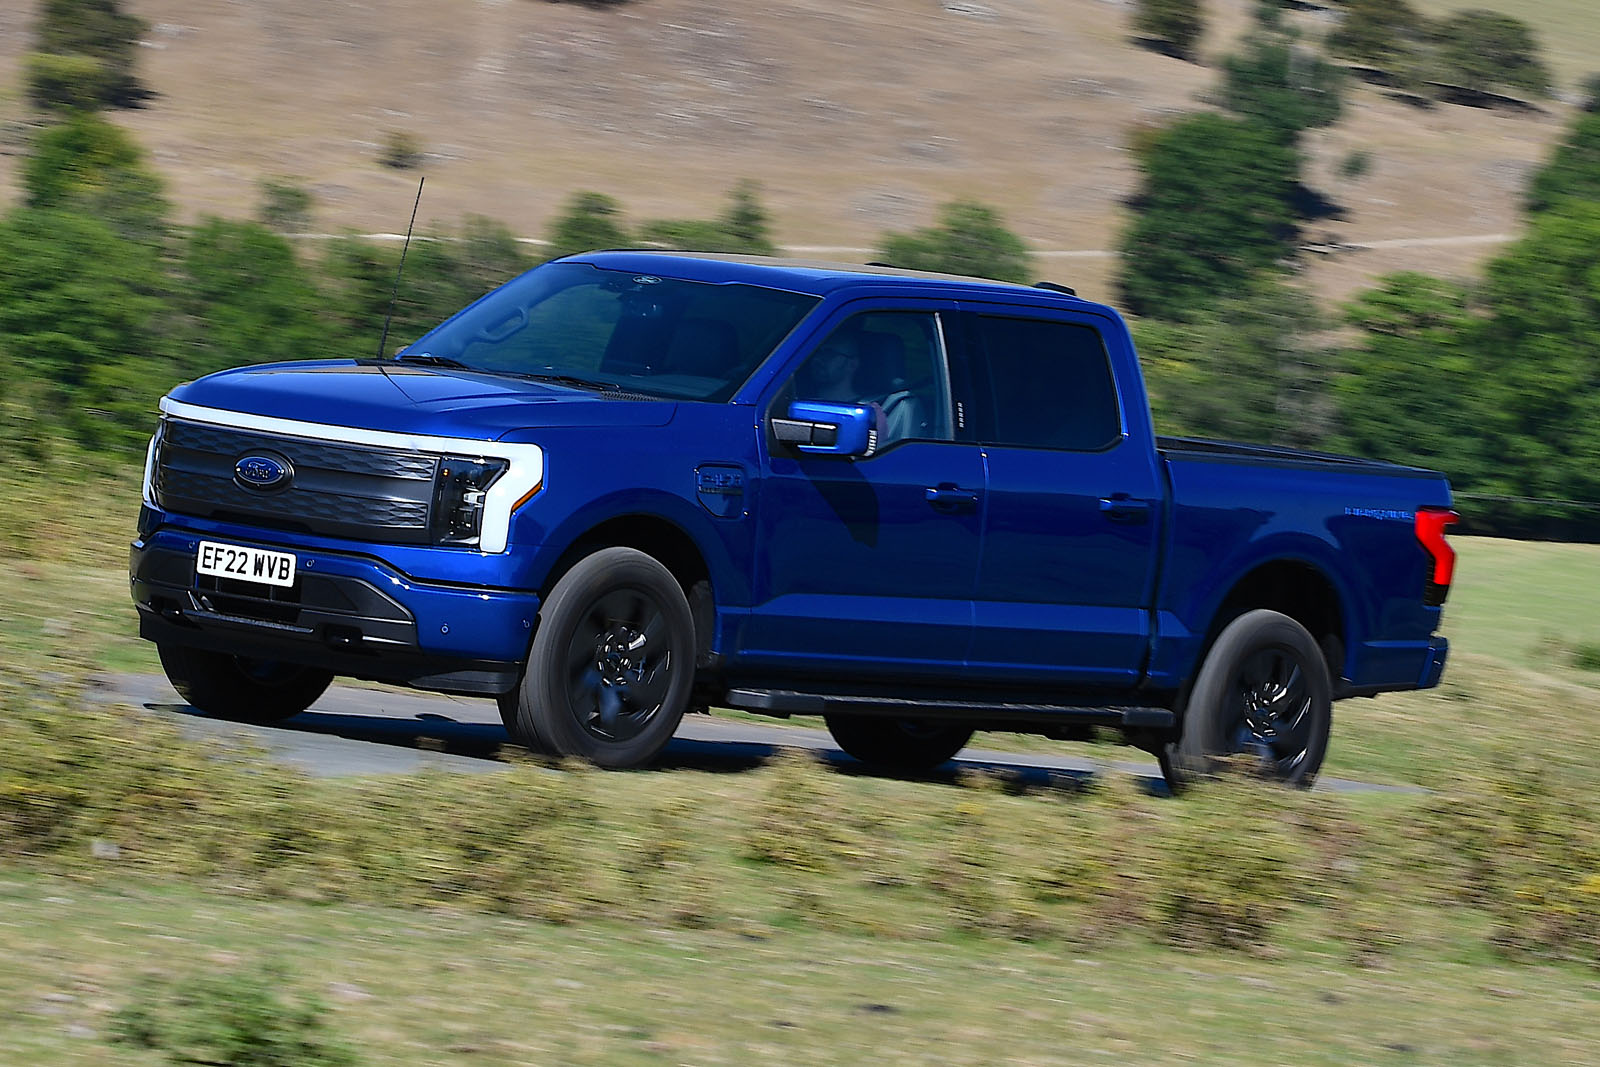 Ford has indicated that a successor to its electric F-150 Lightning pick-up will arrive in 2025 as the production version of the newly announced 